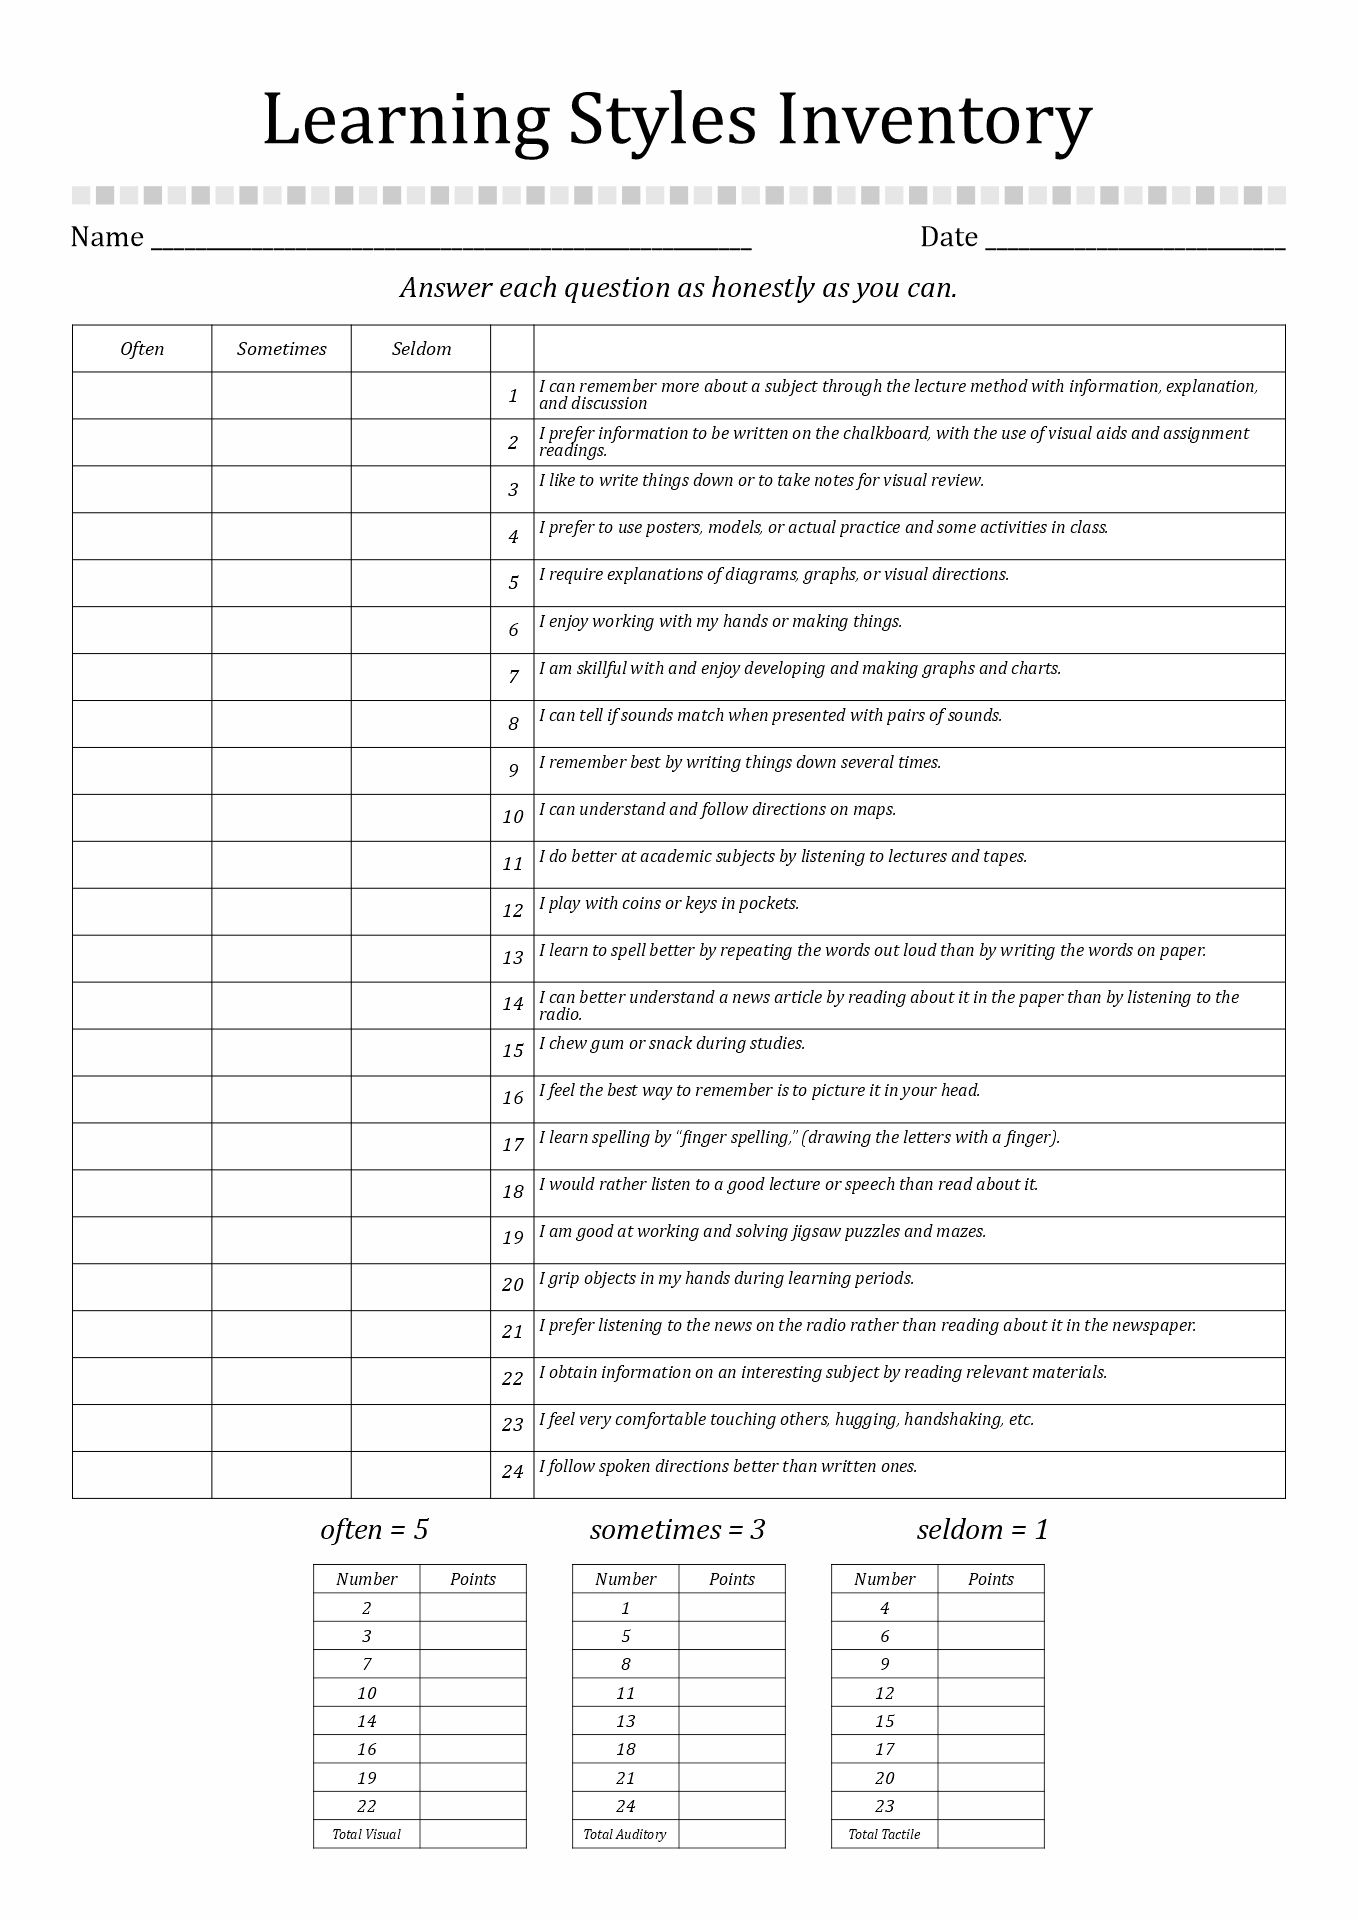 13-best-images-of-learning-styles-inventory-worksheet-printable